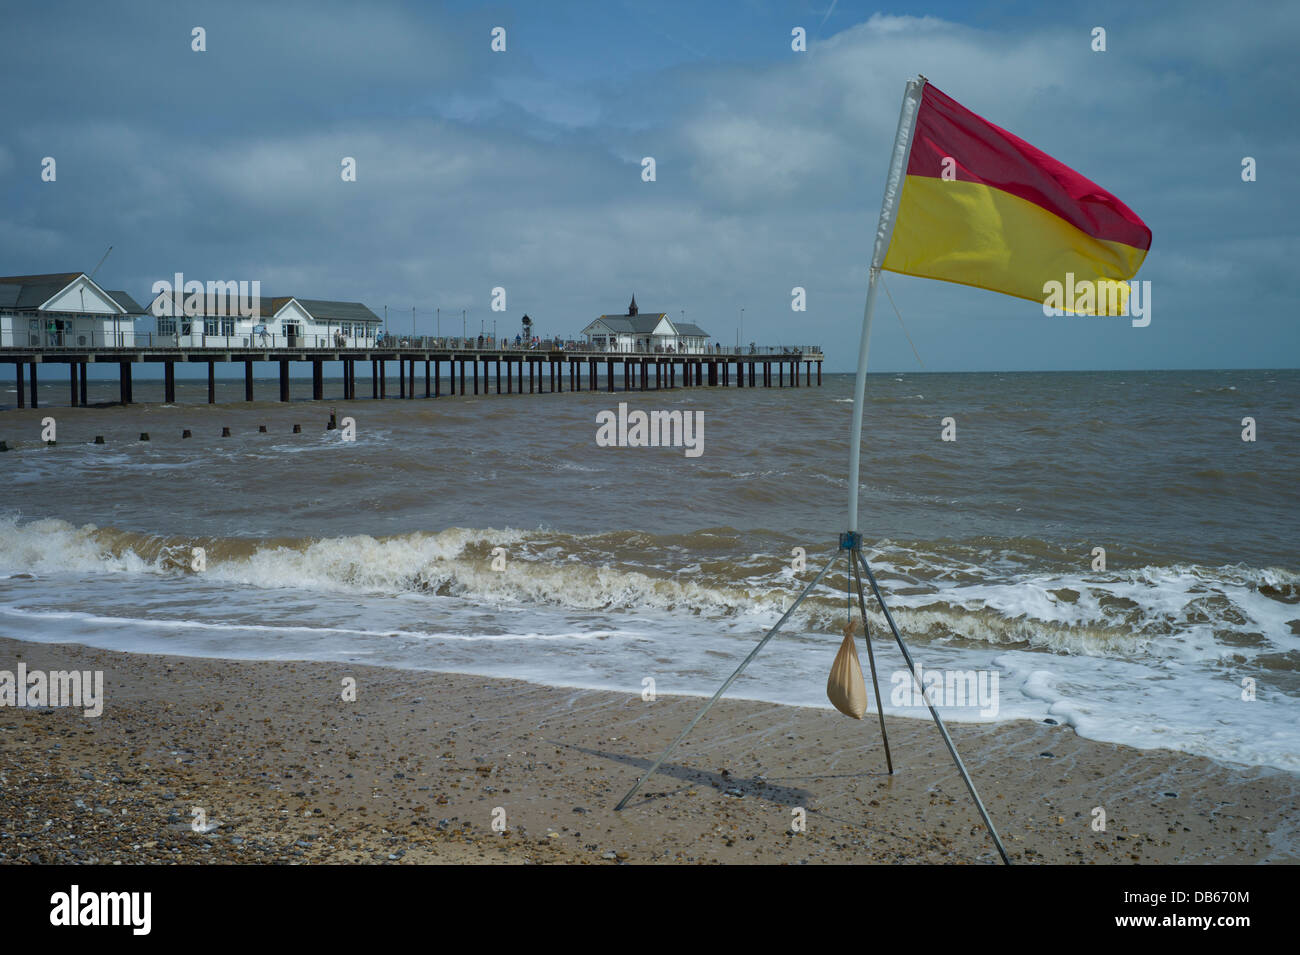 Southwold on the Suffolk  coast, England July 2013. A charming old fashioned seaside resort with Iconic Pier and beach huts. Stock Photo